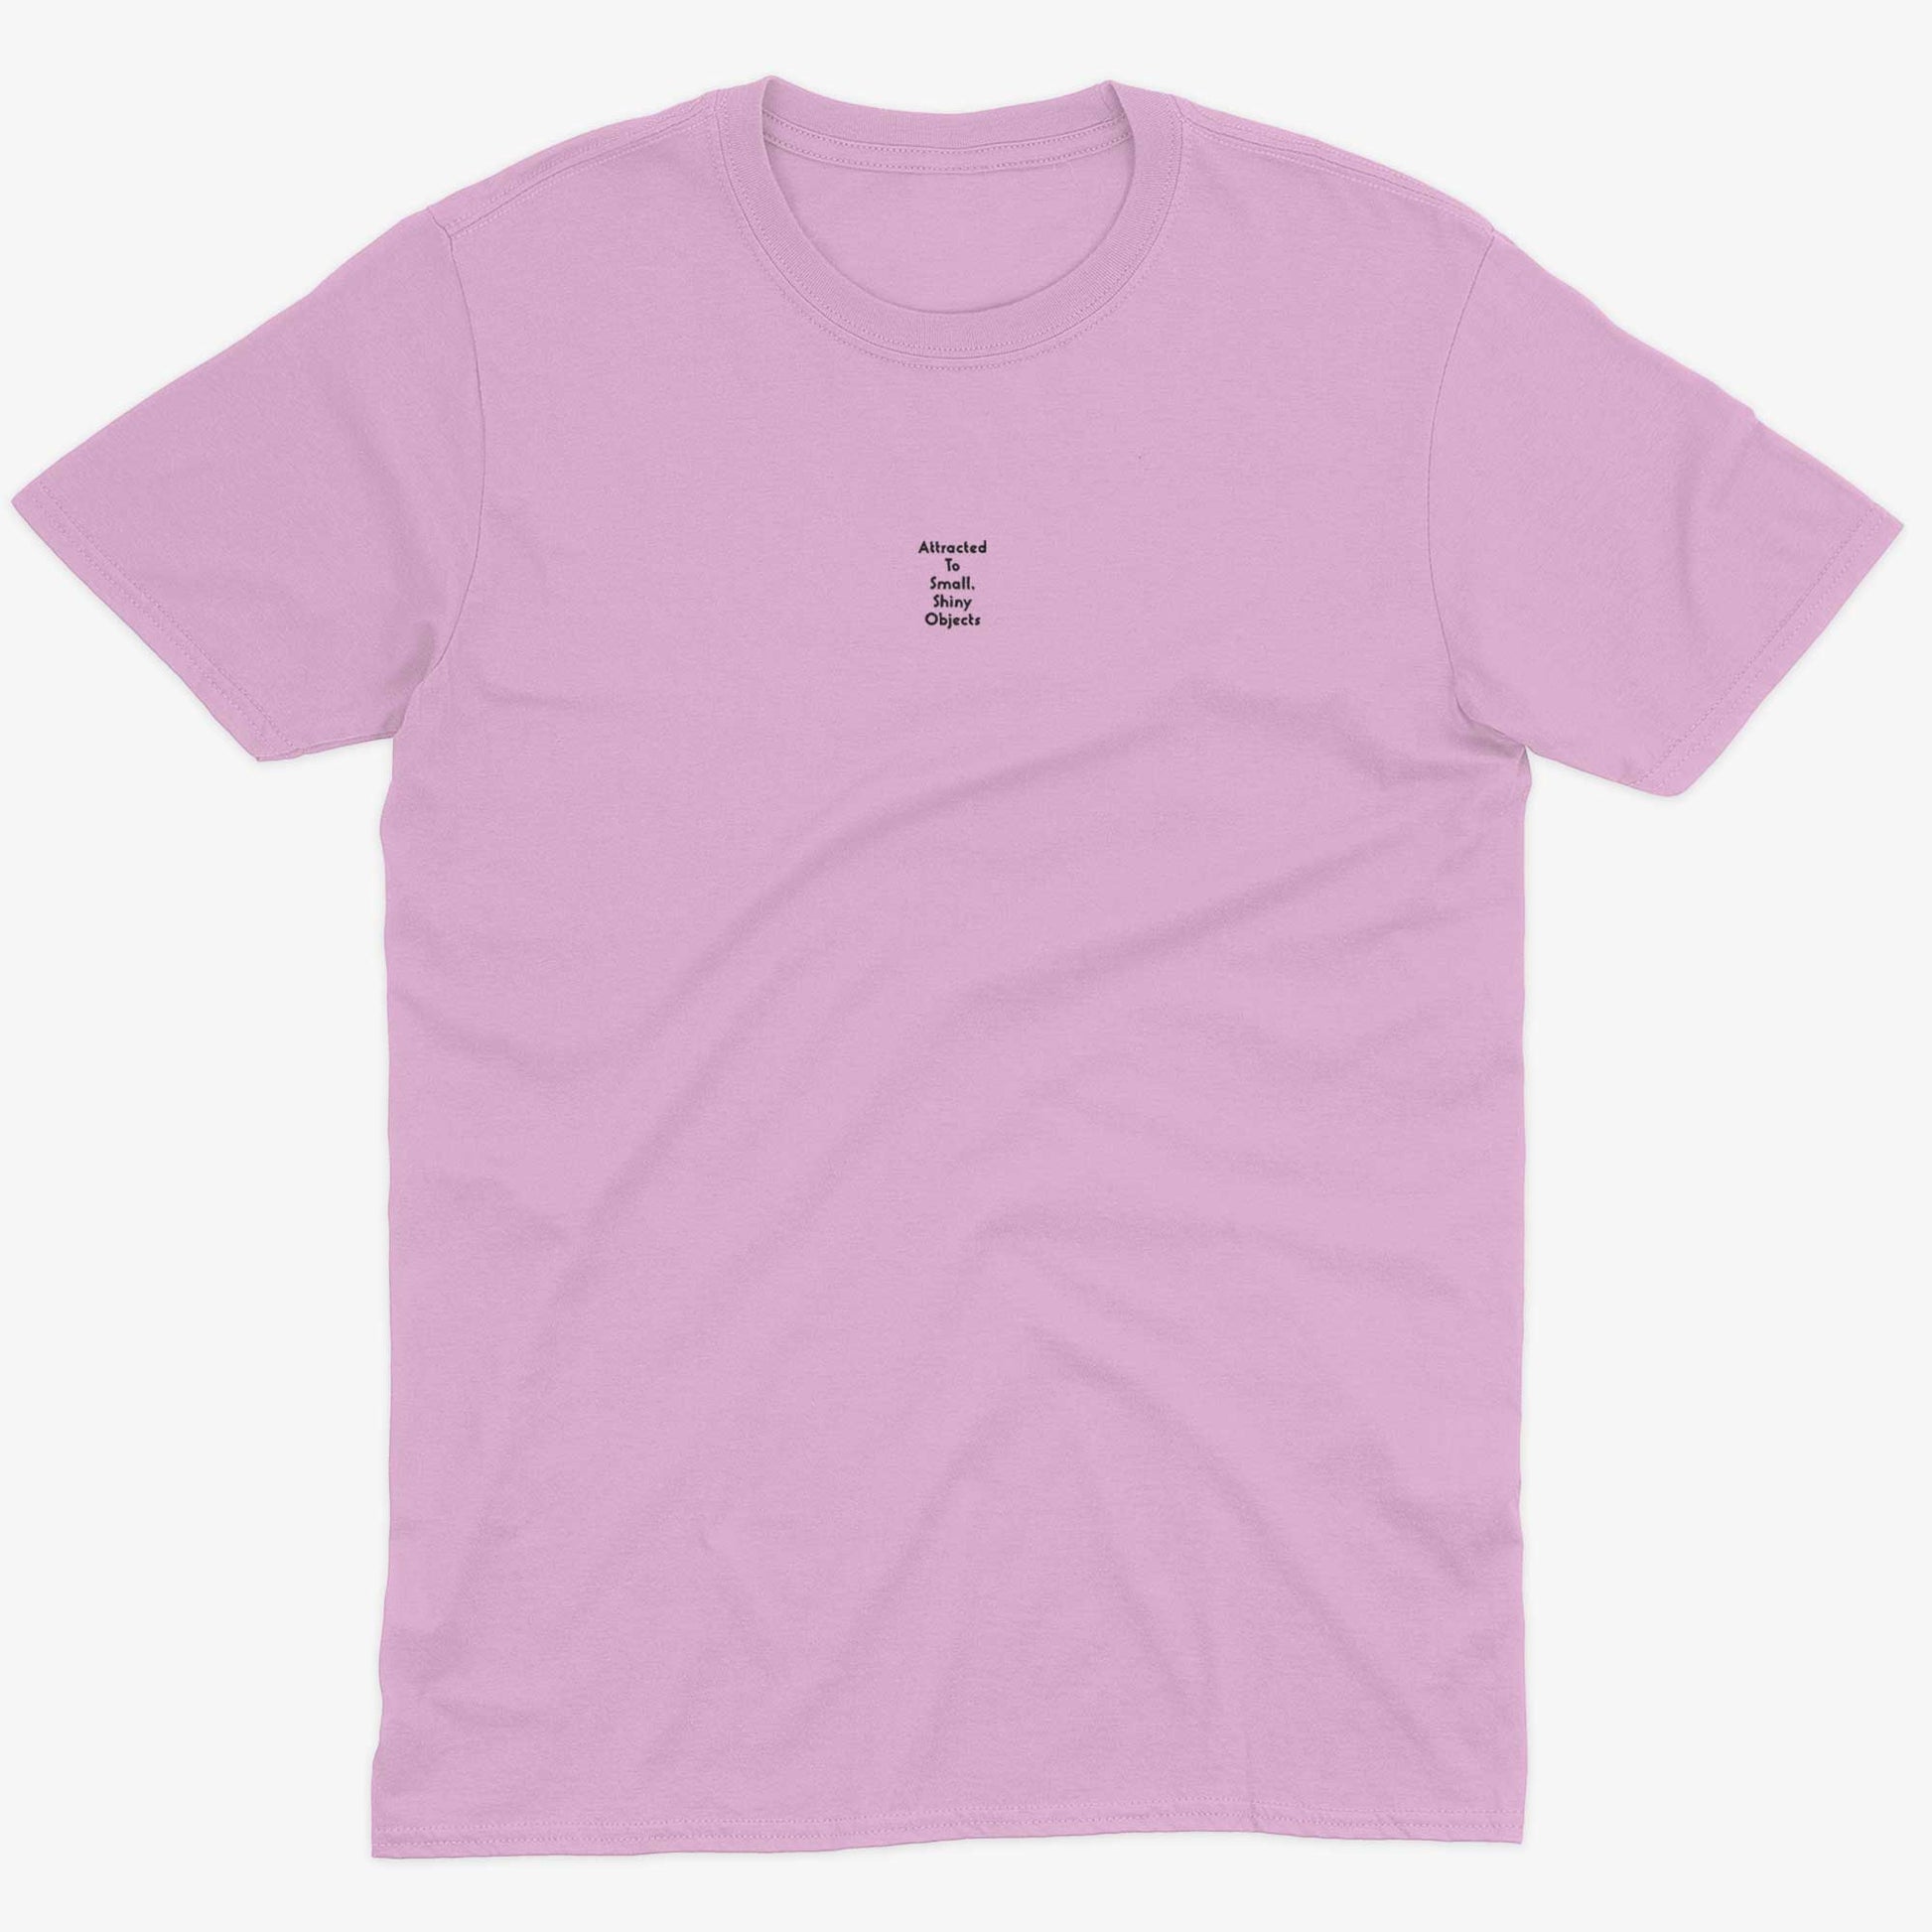 Attracted To Small, Shiny Objects Unisex Or Women's Cotton T-shirt-Pink-Unisex